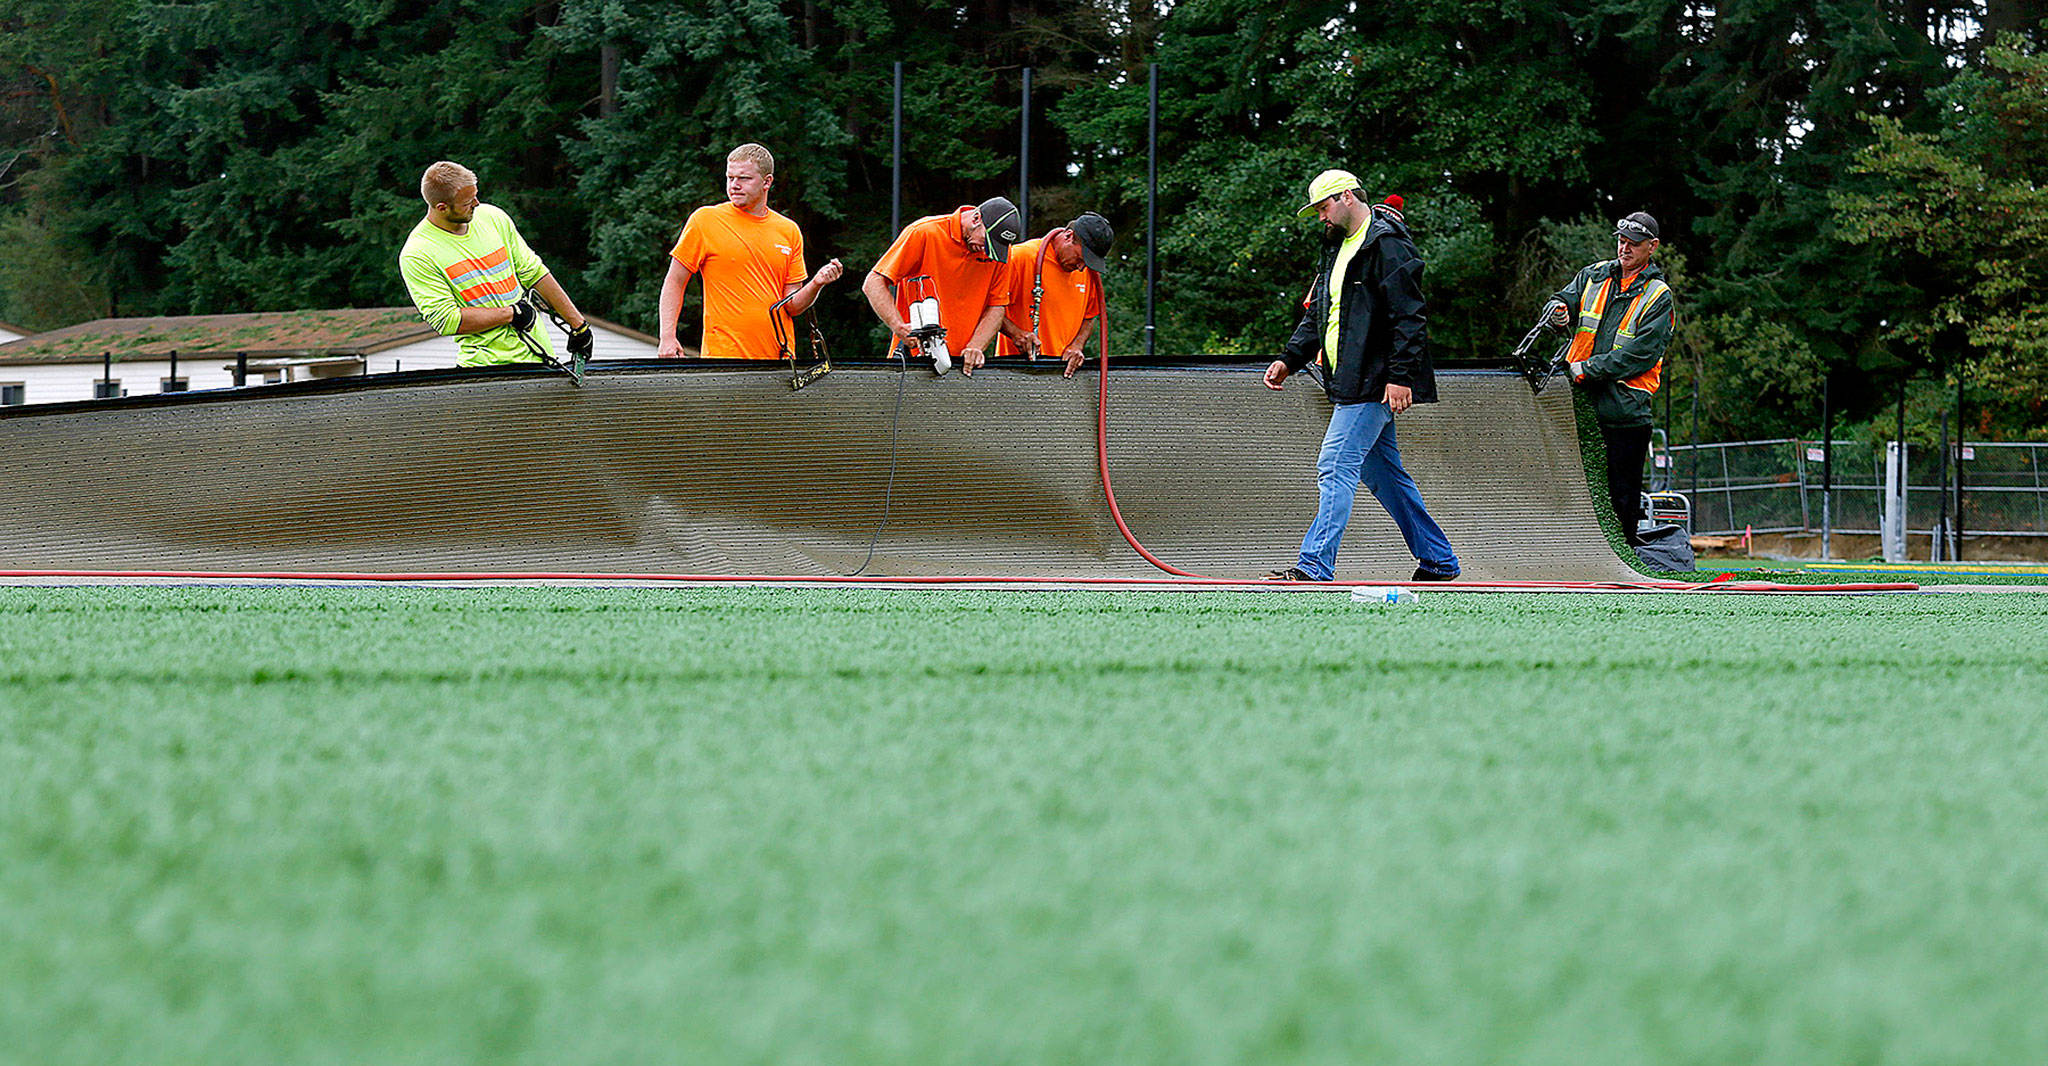 Contractors install artificial turf on the fields at the old Woodway High School in 2015. (Herald file)